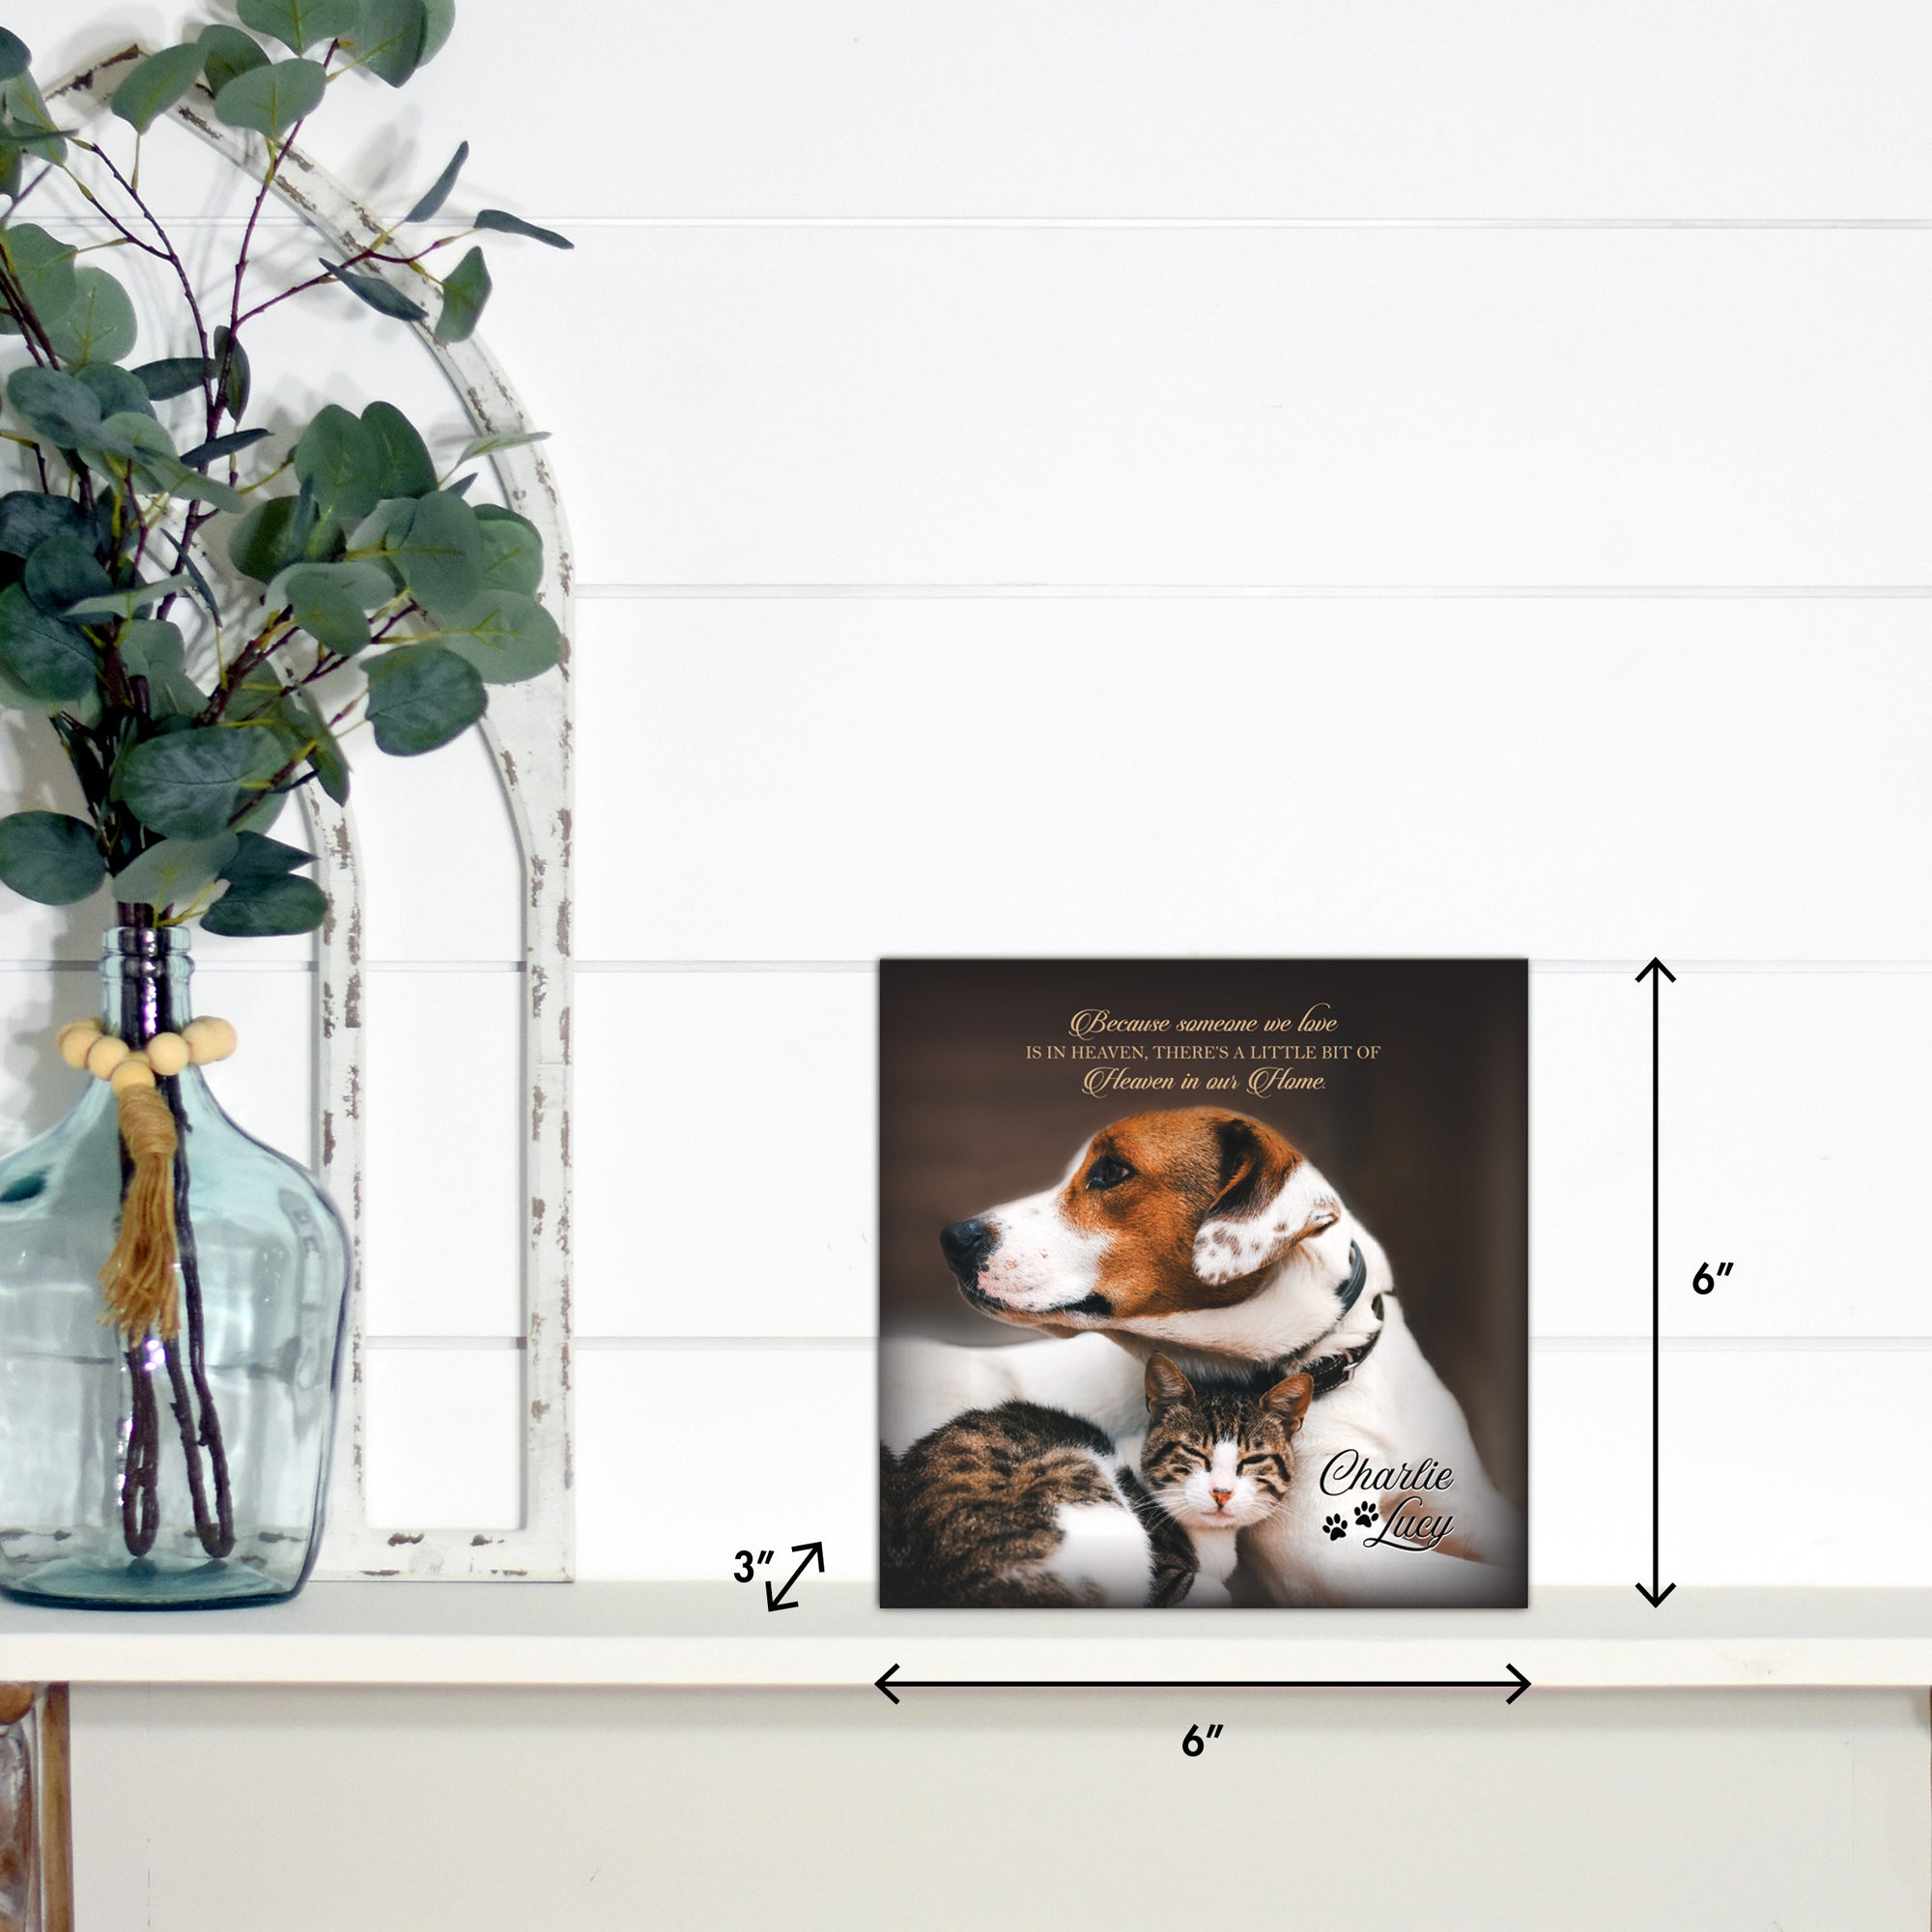 Pet Memorial Custom Photo Shadow Box Cremation Urn - Because Someone We Love Is In Heaven